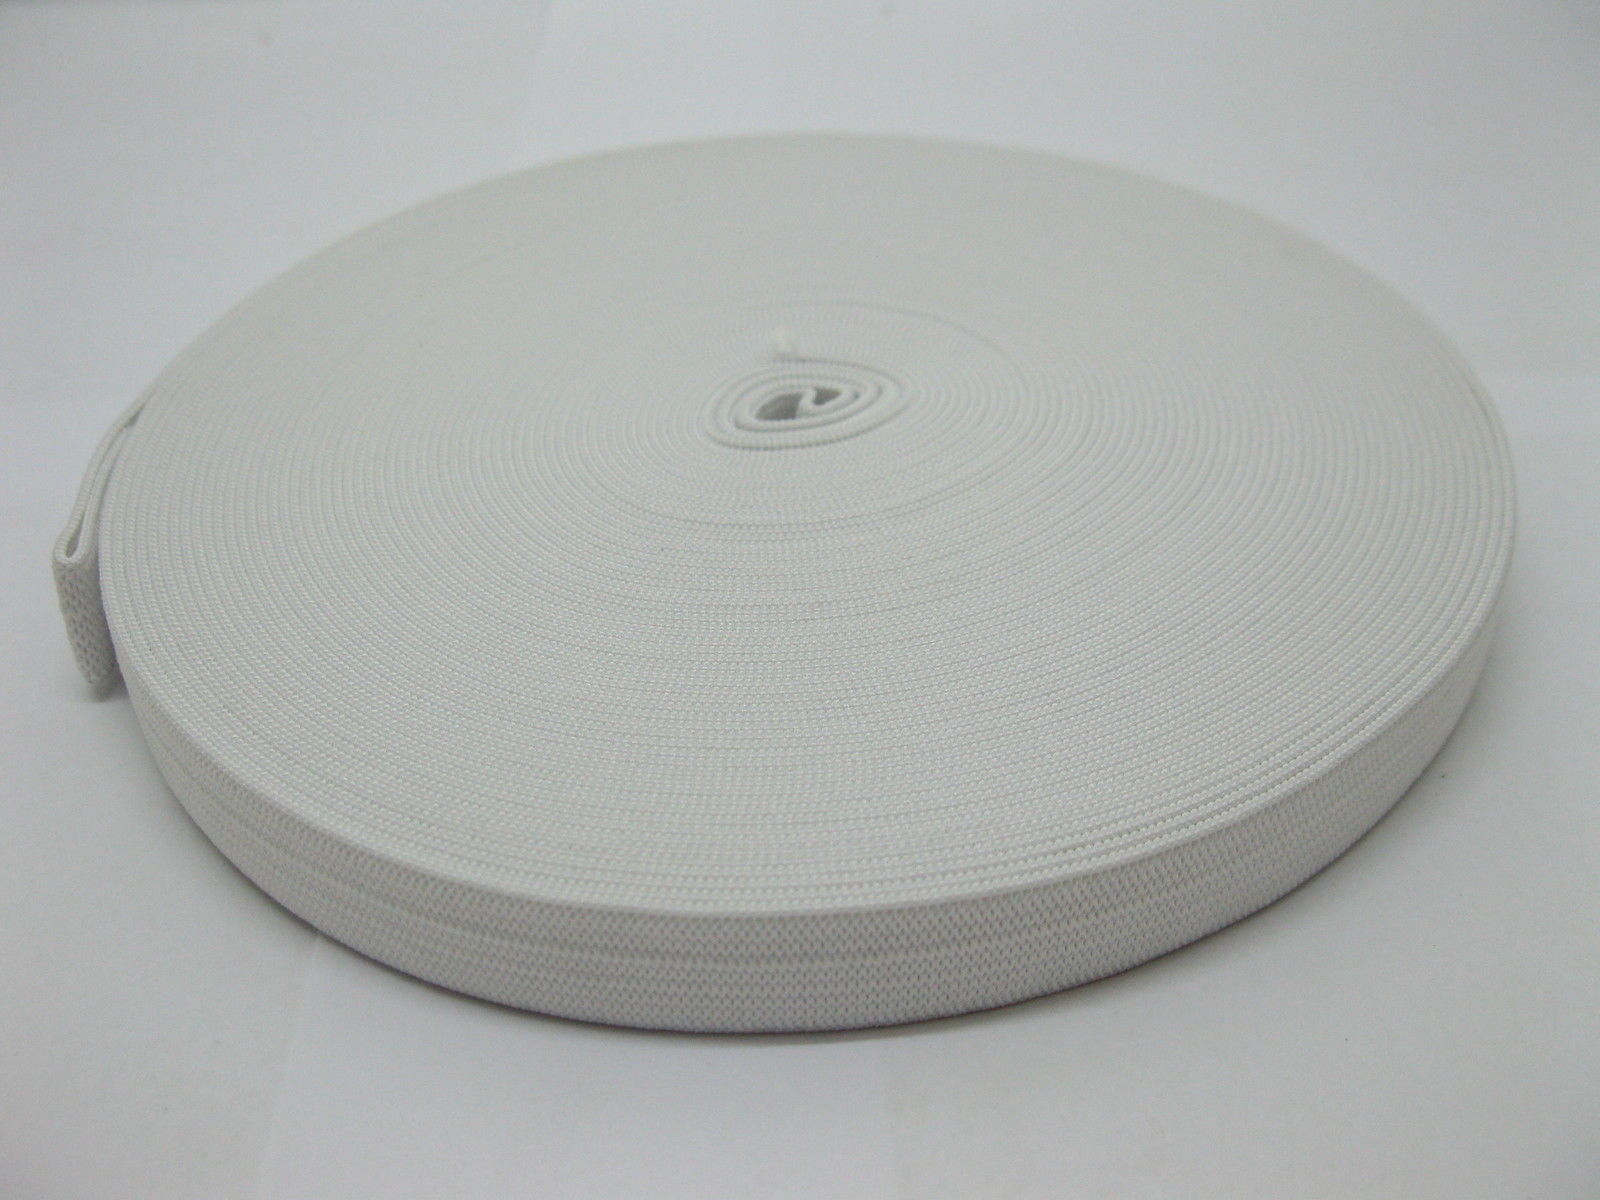 Quality Elastic 50 metres 30mm wide